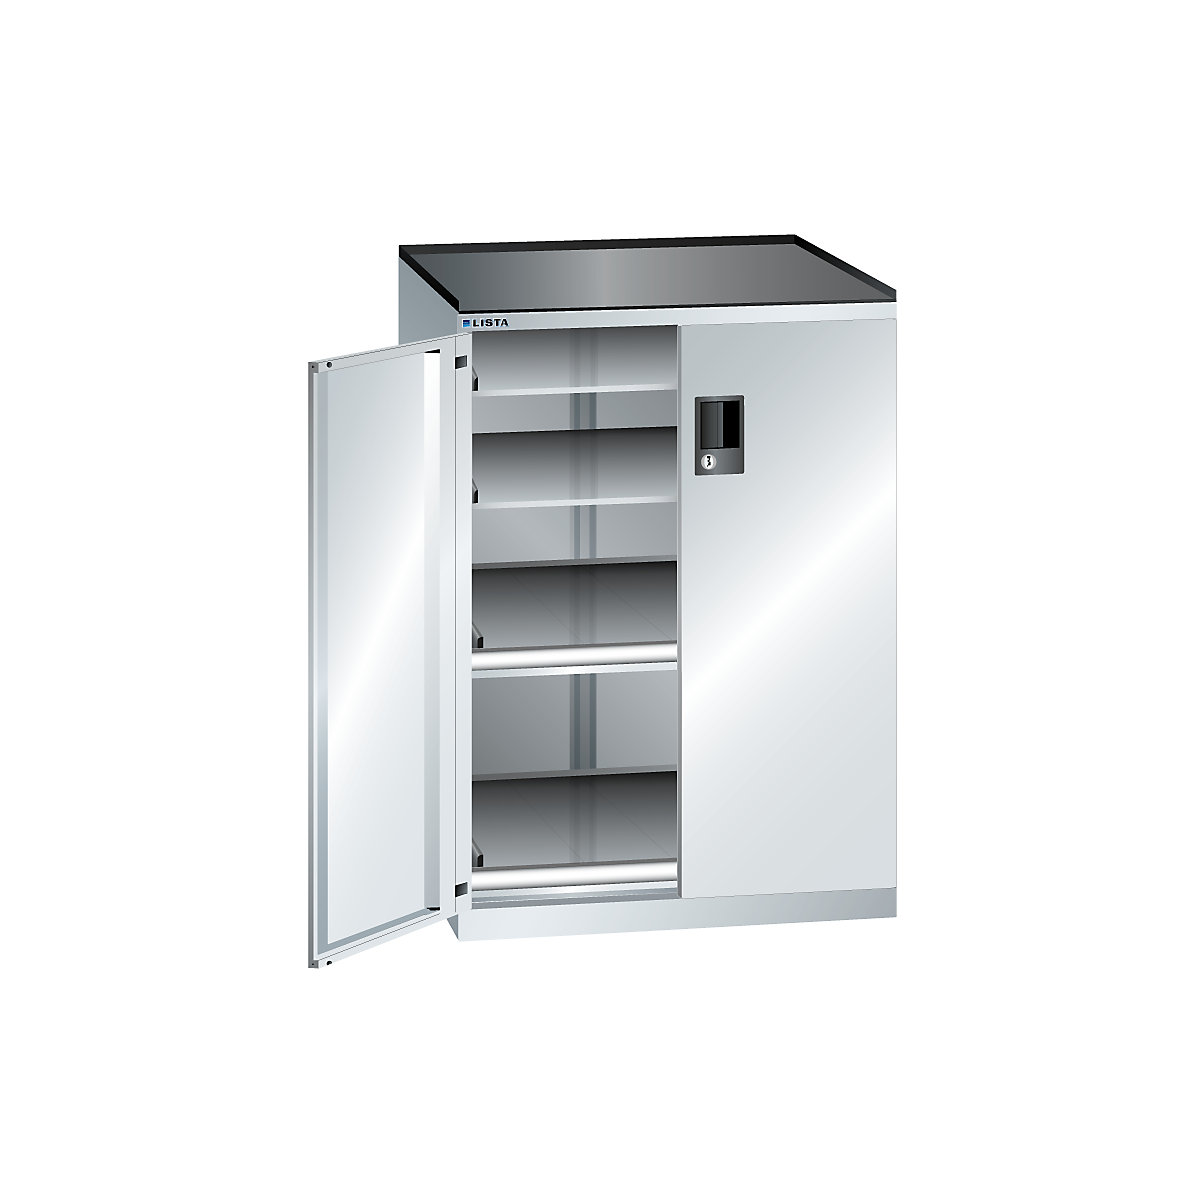 Drawer cupboard with hinged doors – LISTA, height 1020 mm, 4 shelves, max. load 200 kg, light grey-3